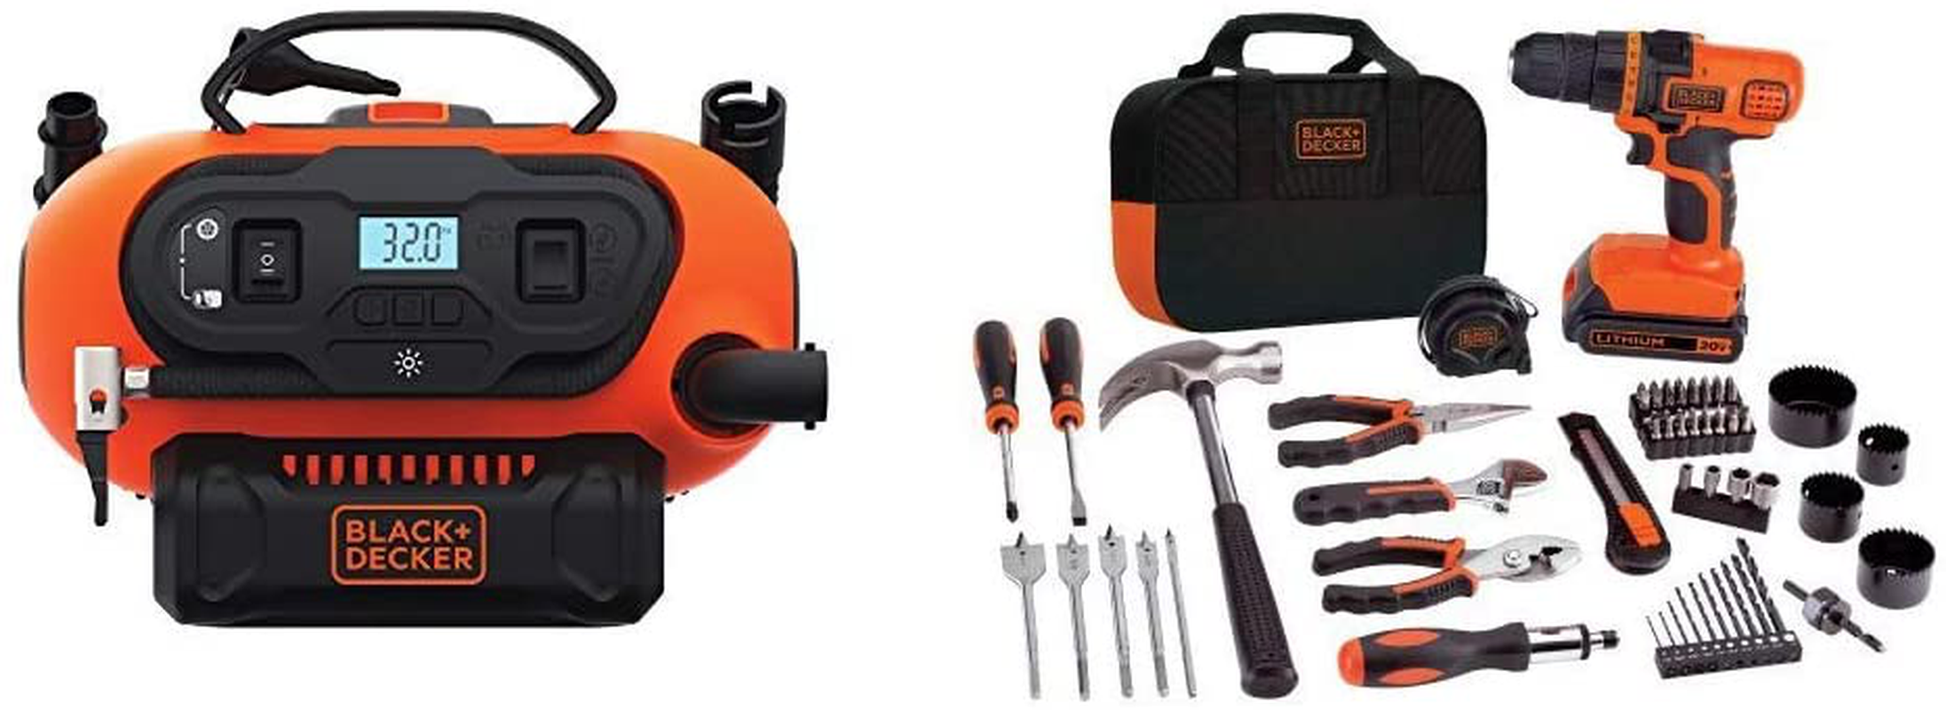 BLACK+DECKER BDINF20C 20V Lithium Cordless Multi-Purpose Inflator (Tool Only) with BLACK+DECKER LDX120PK 20V MAX Cordless Drill and Battery Power Project Kit